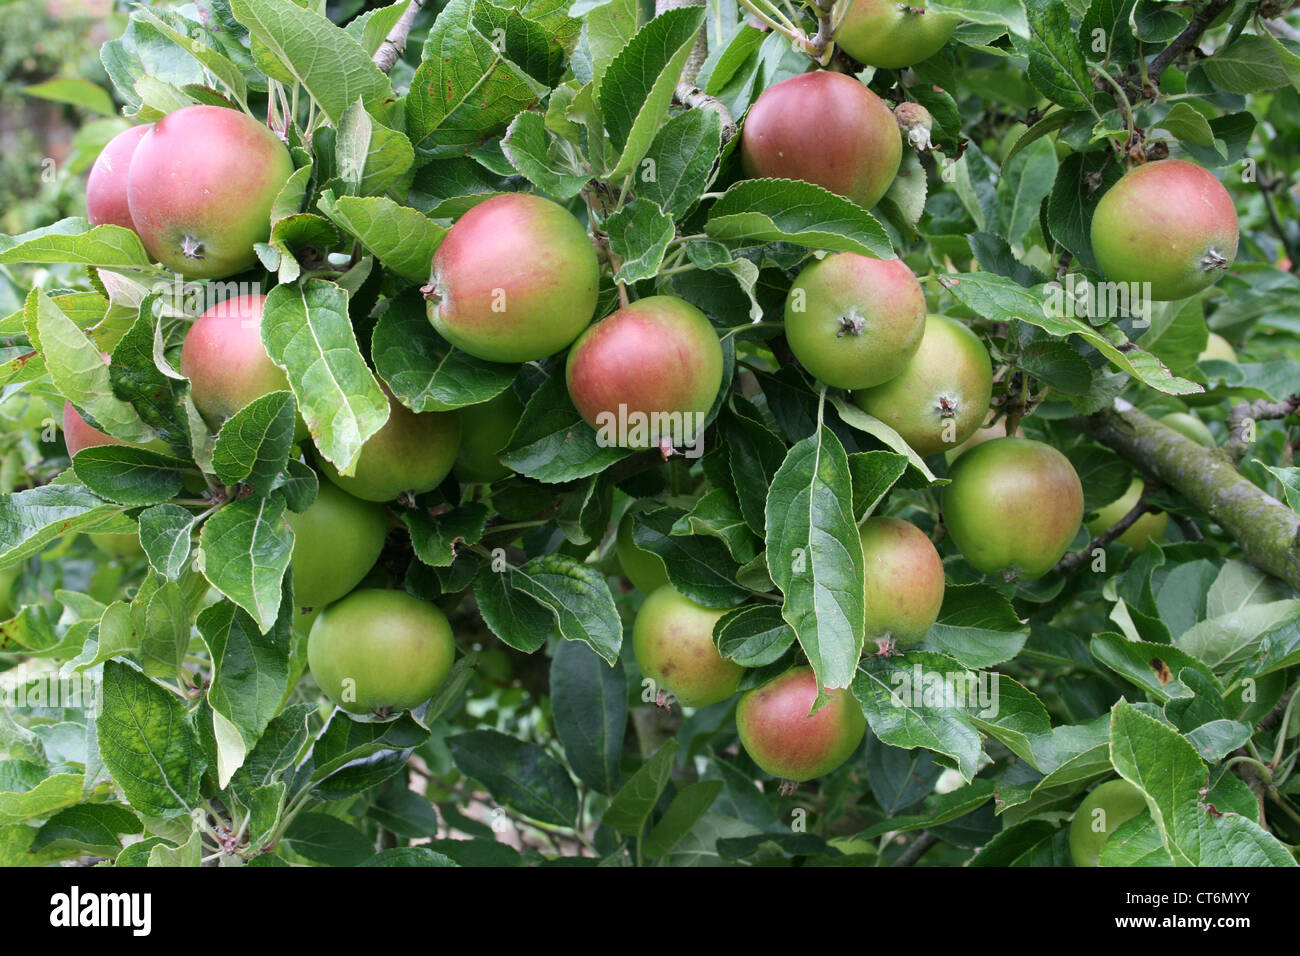 Fruit Tree Laden With Apples Stock Photo